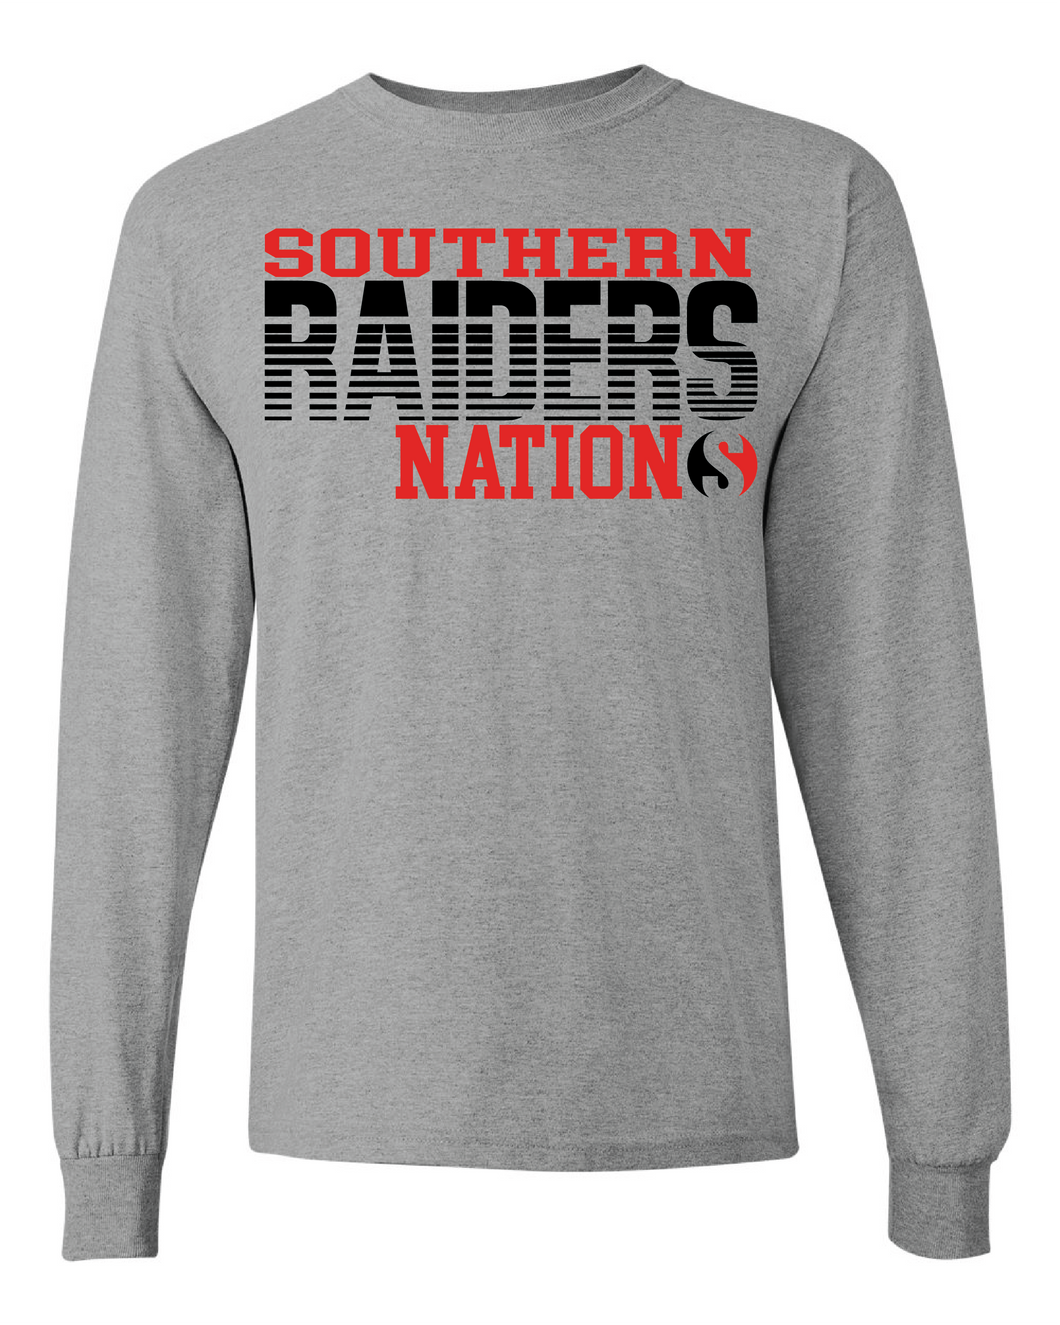 Southern Long Sleeve Design 4